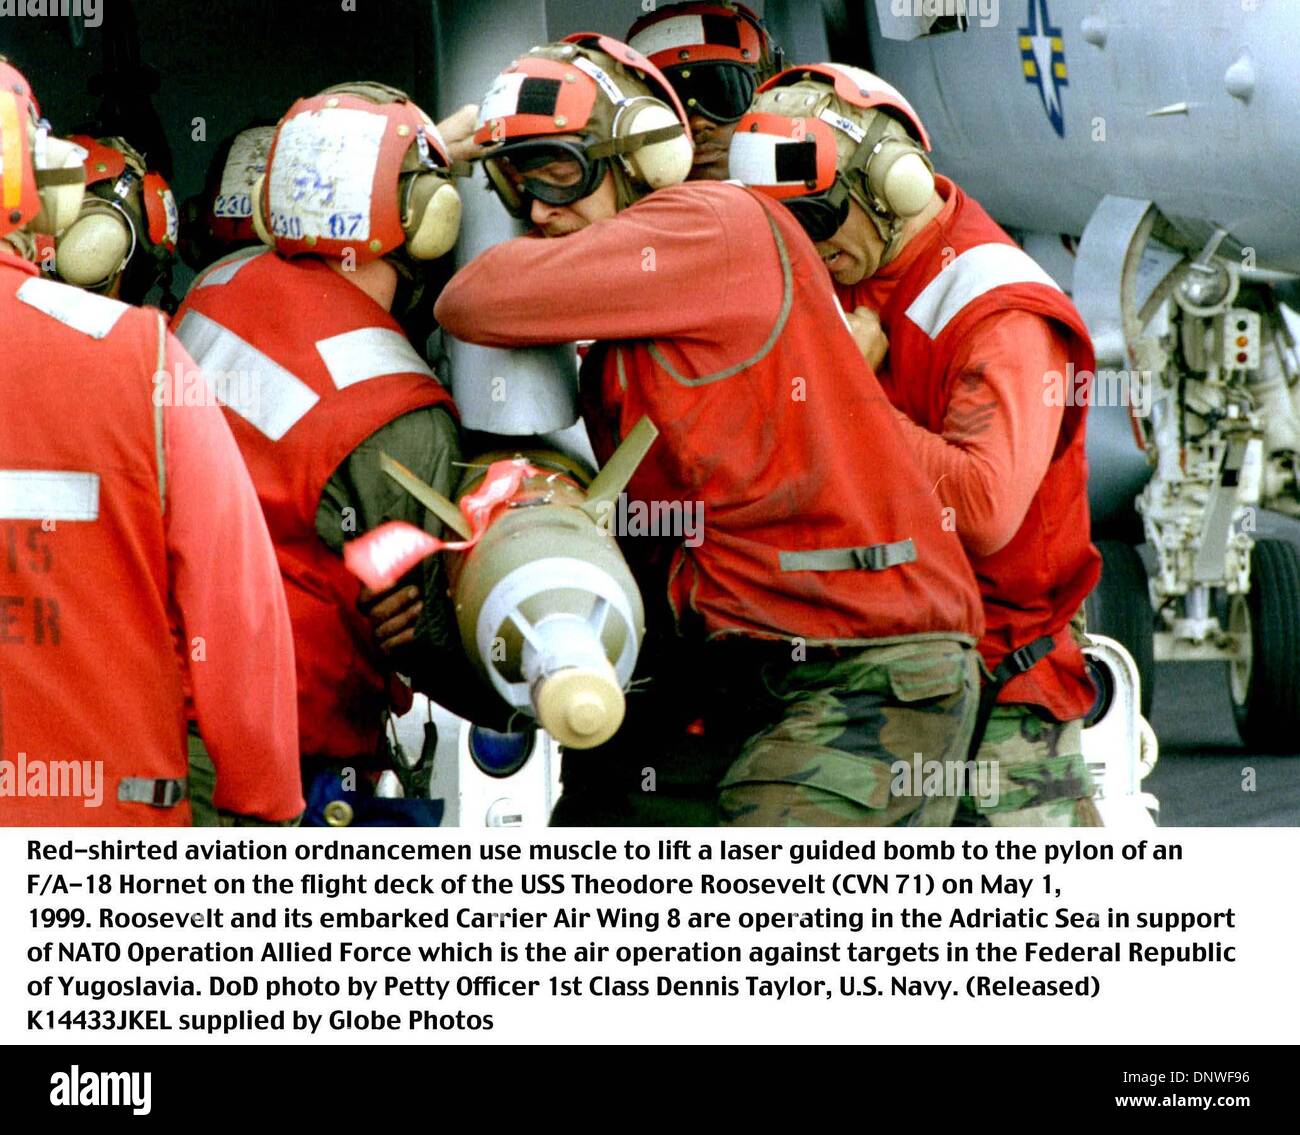 May 1, 1999 - Adriatic Sea - K14433JKEL     05/01/99.990501-N-6119T-003..Red-shirted aviation ordnancemen use muscle to lift a laser guided bomb to the pylon of an F/A-18 Hornet on the flight deck of the USS Theodore Roosevelt (CVN 71) on May 1, 1999.  Roosevelt and its embarked Carrier Air Wing 8 are operating in the Adriatic Sea is support of Operation Allied Force which is the a Stock Photo